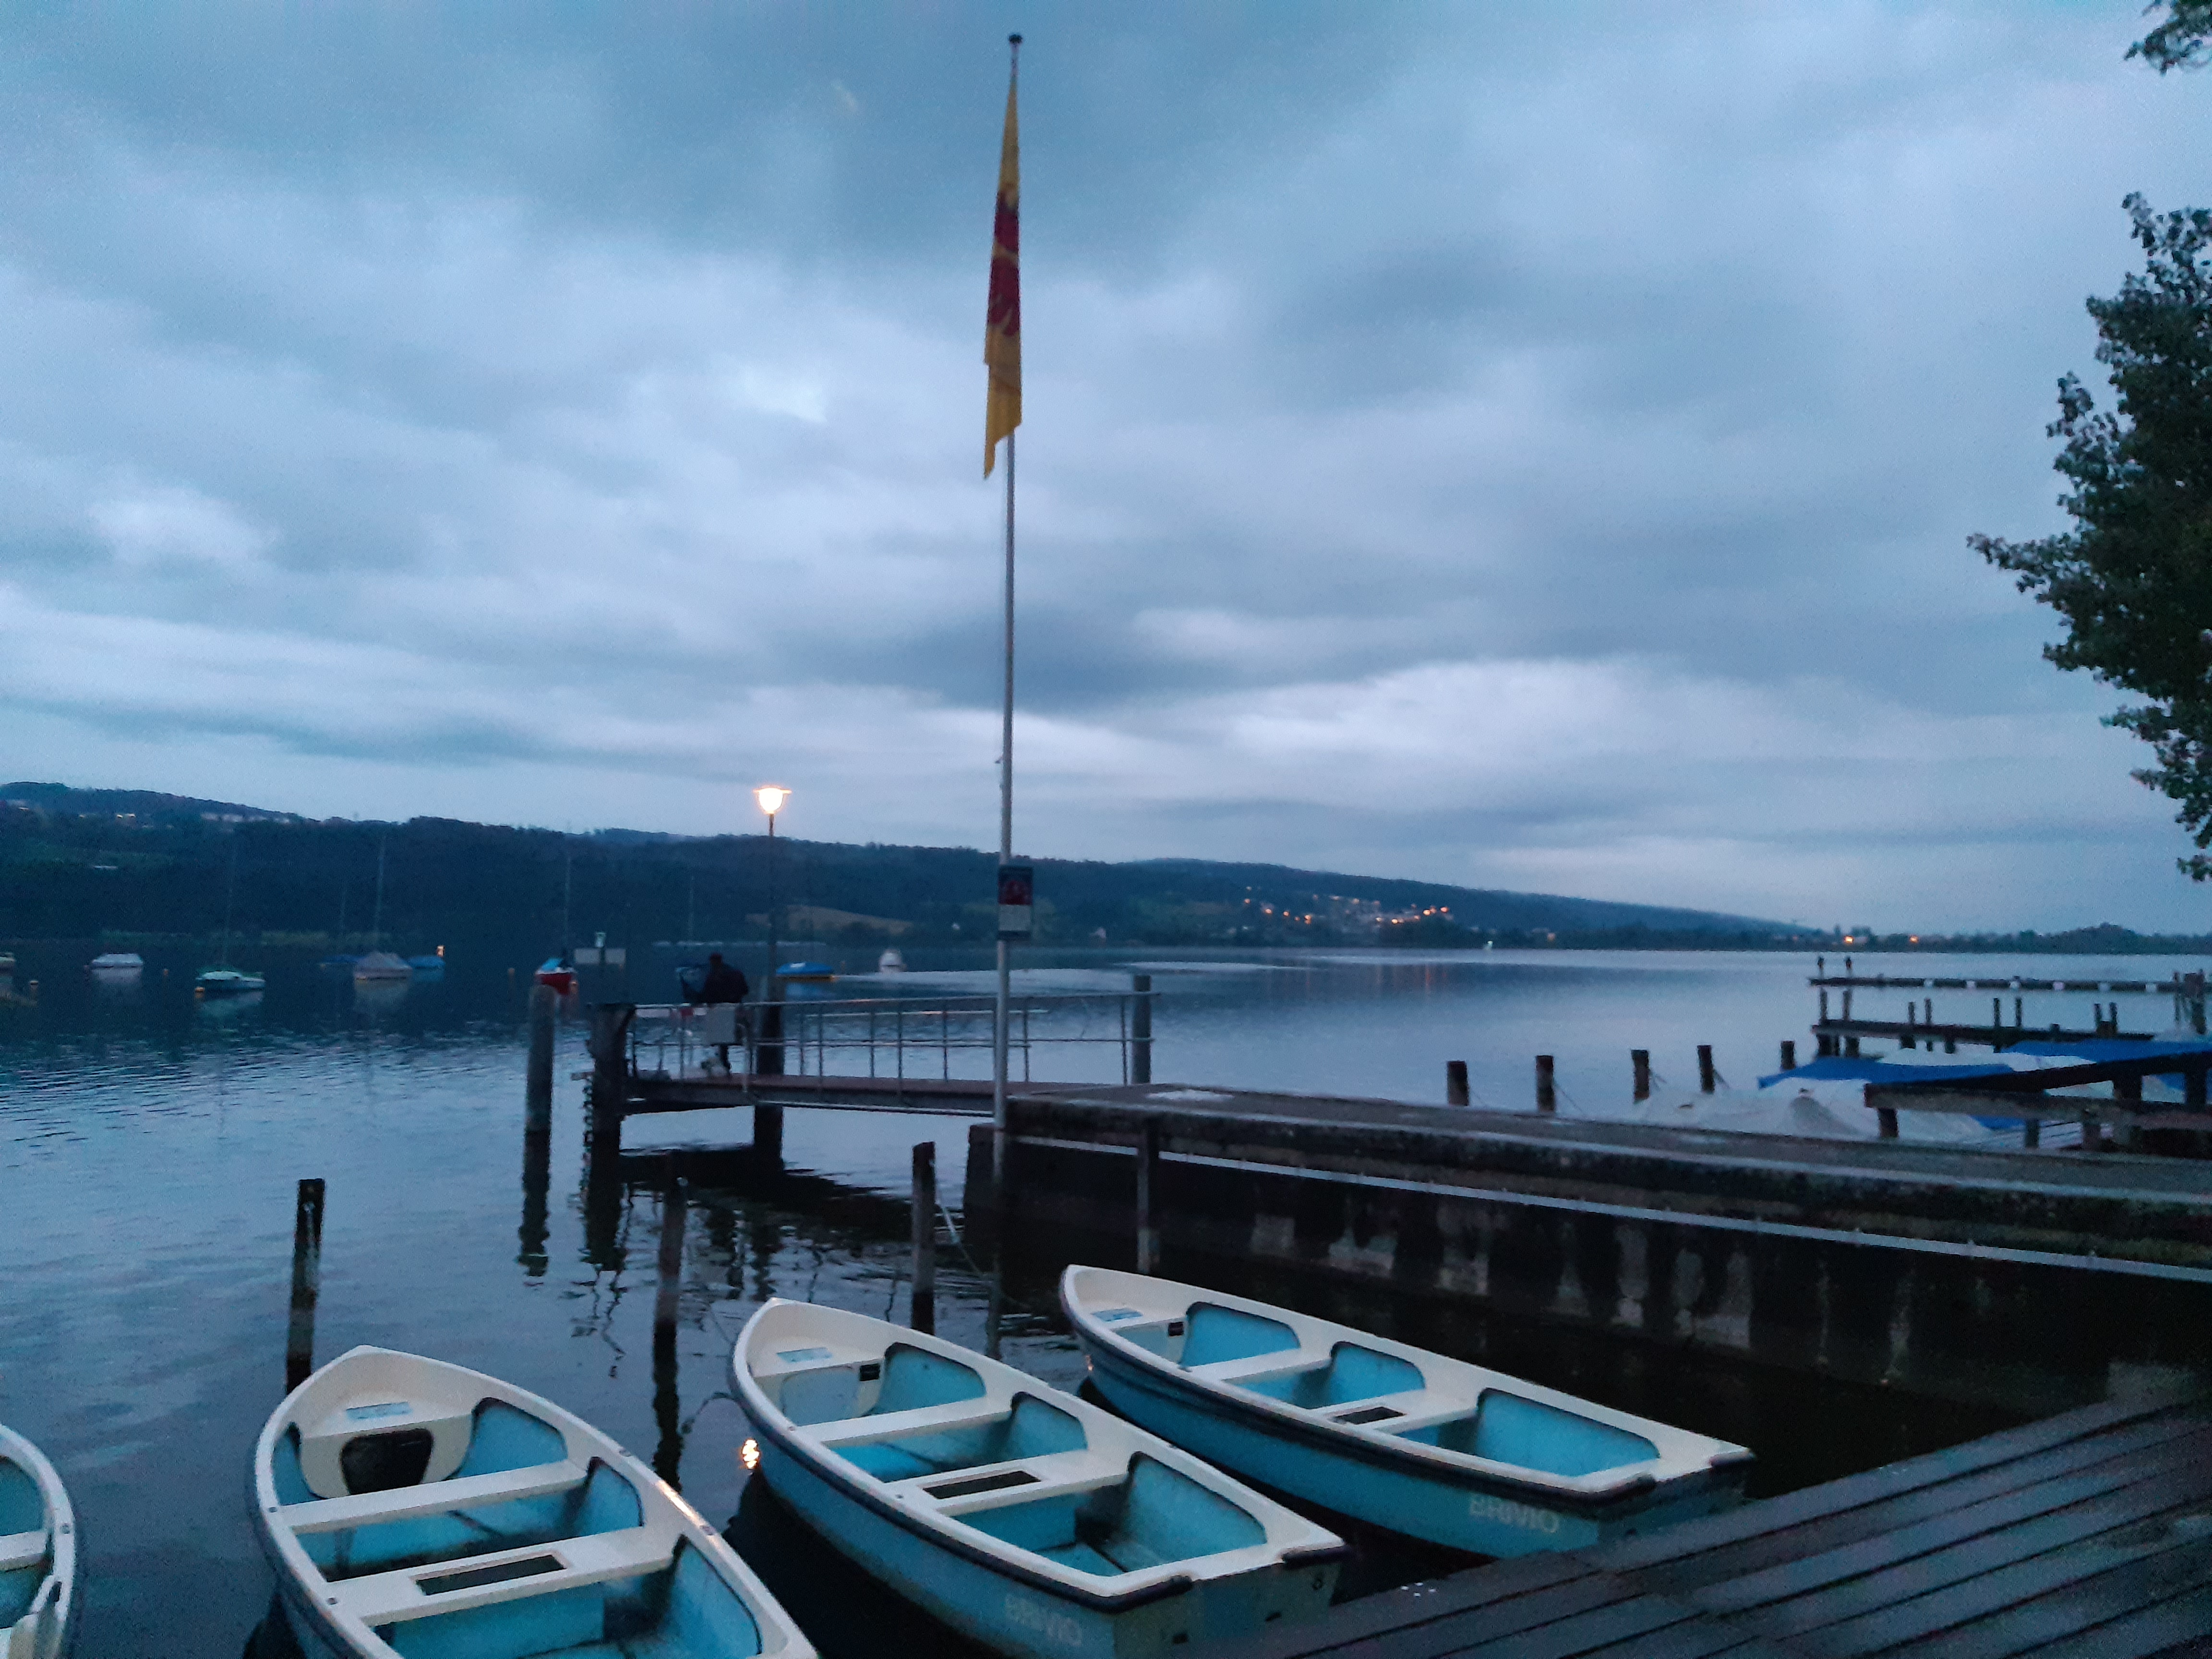 ... we decide to skip the cycling and replace it with sightseeing at the Greifensee...